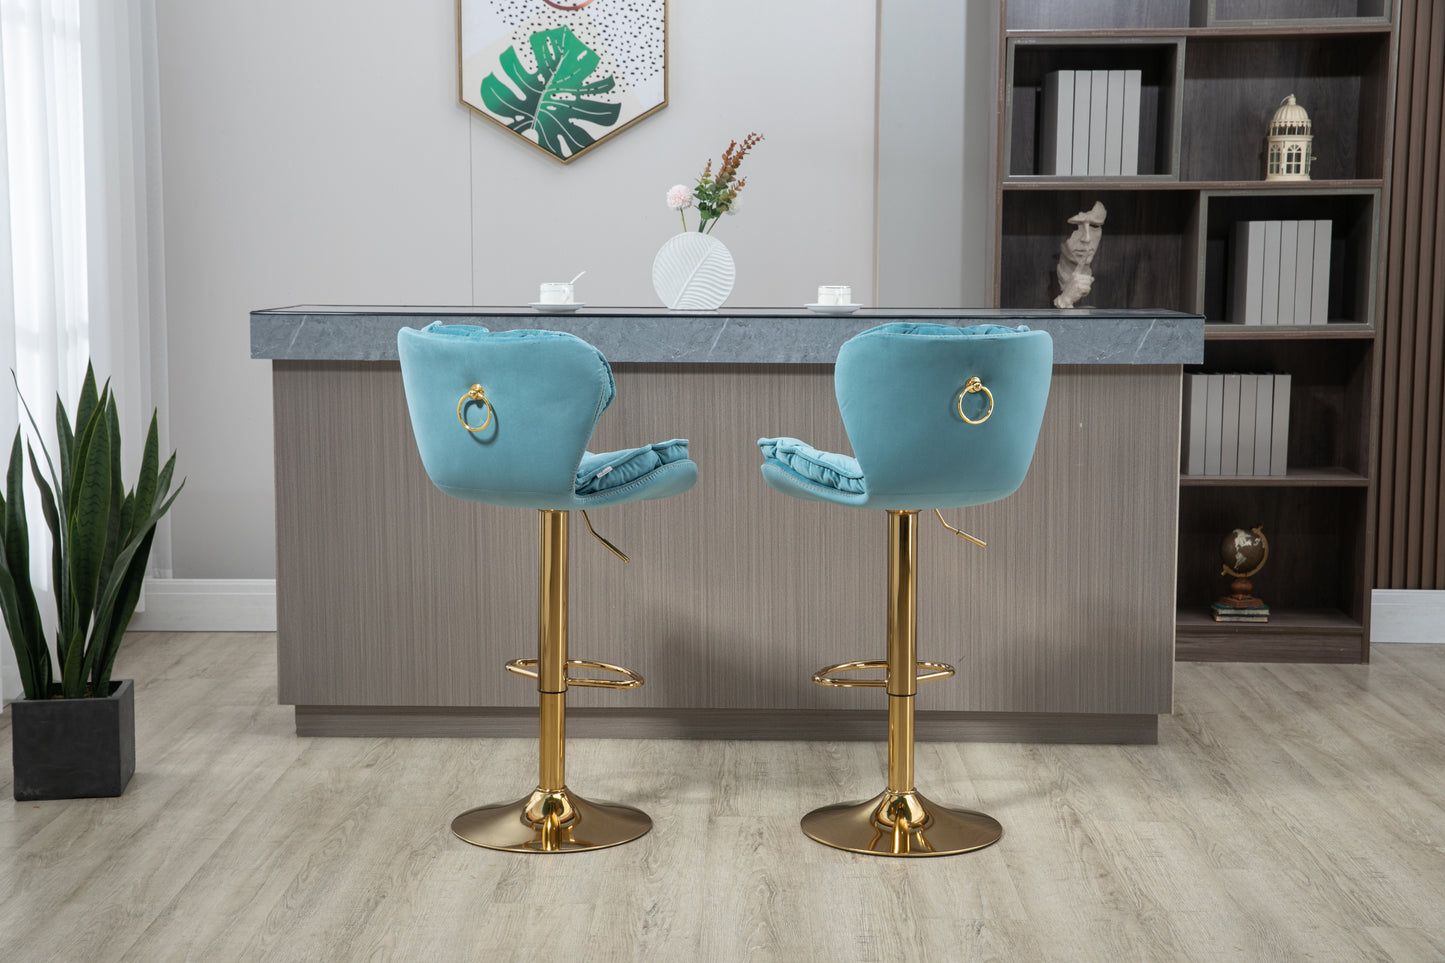 COOLMORE Bar Stools with Back and Footrest Counter Height Dining Chairs Set of 2